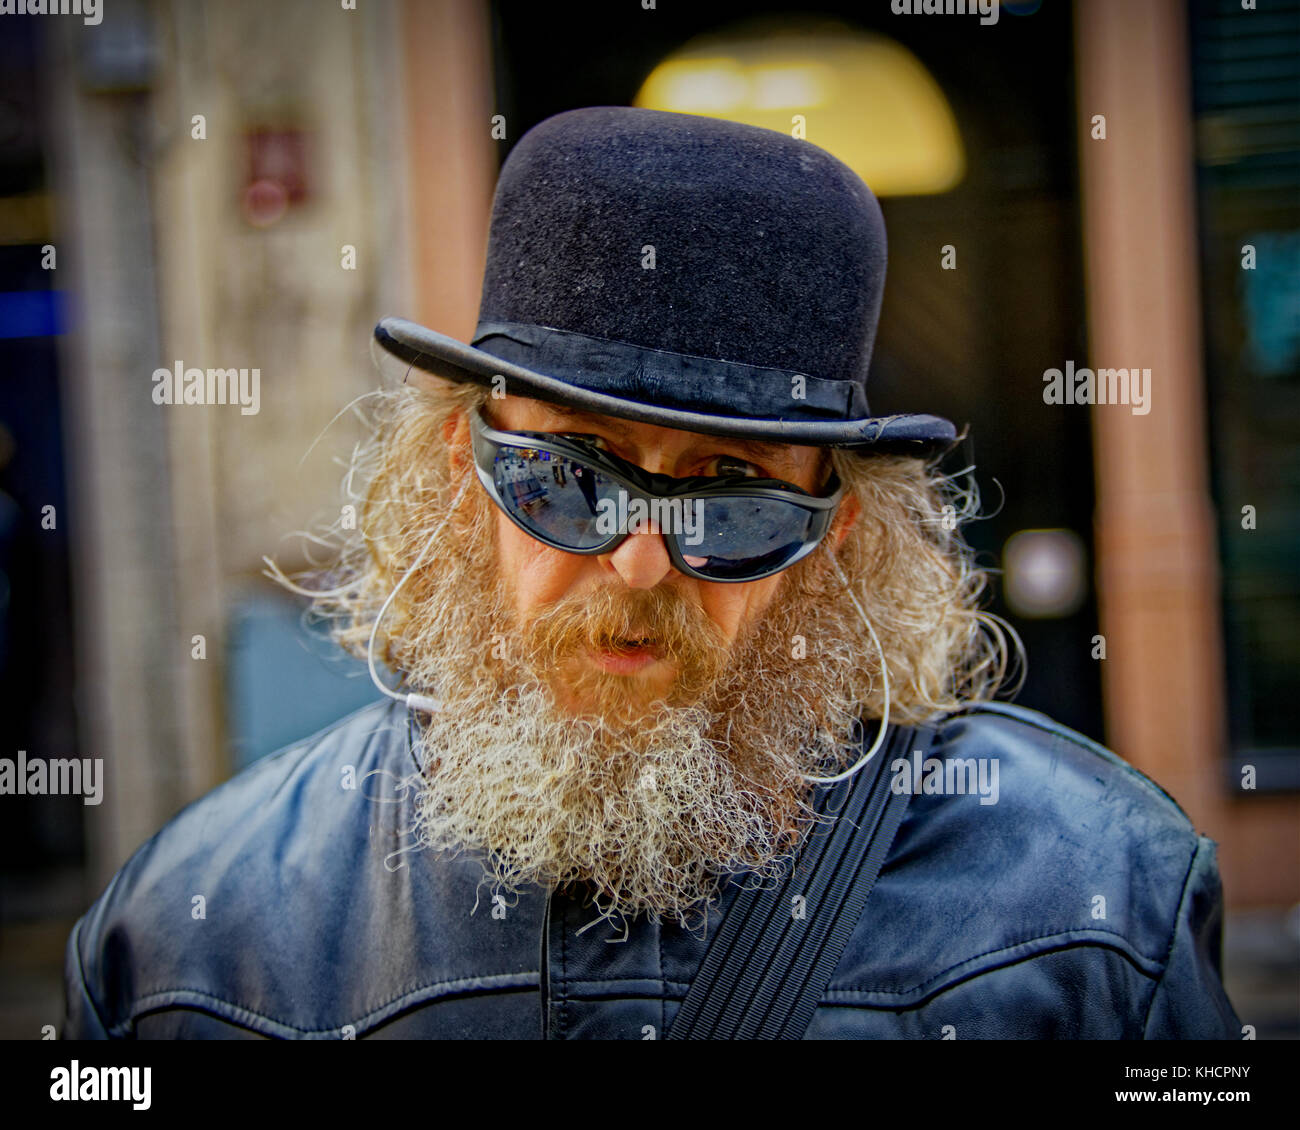 local artist frankie patrick robertson character on the street bowler hat trench coat sunglasses bearded happy man wired for sound Stock Photo